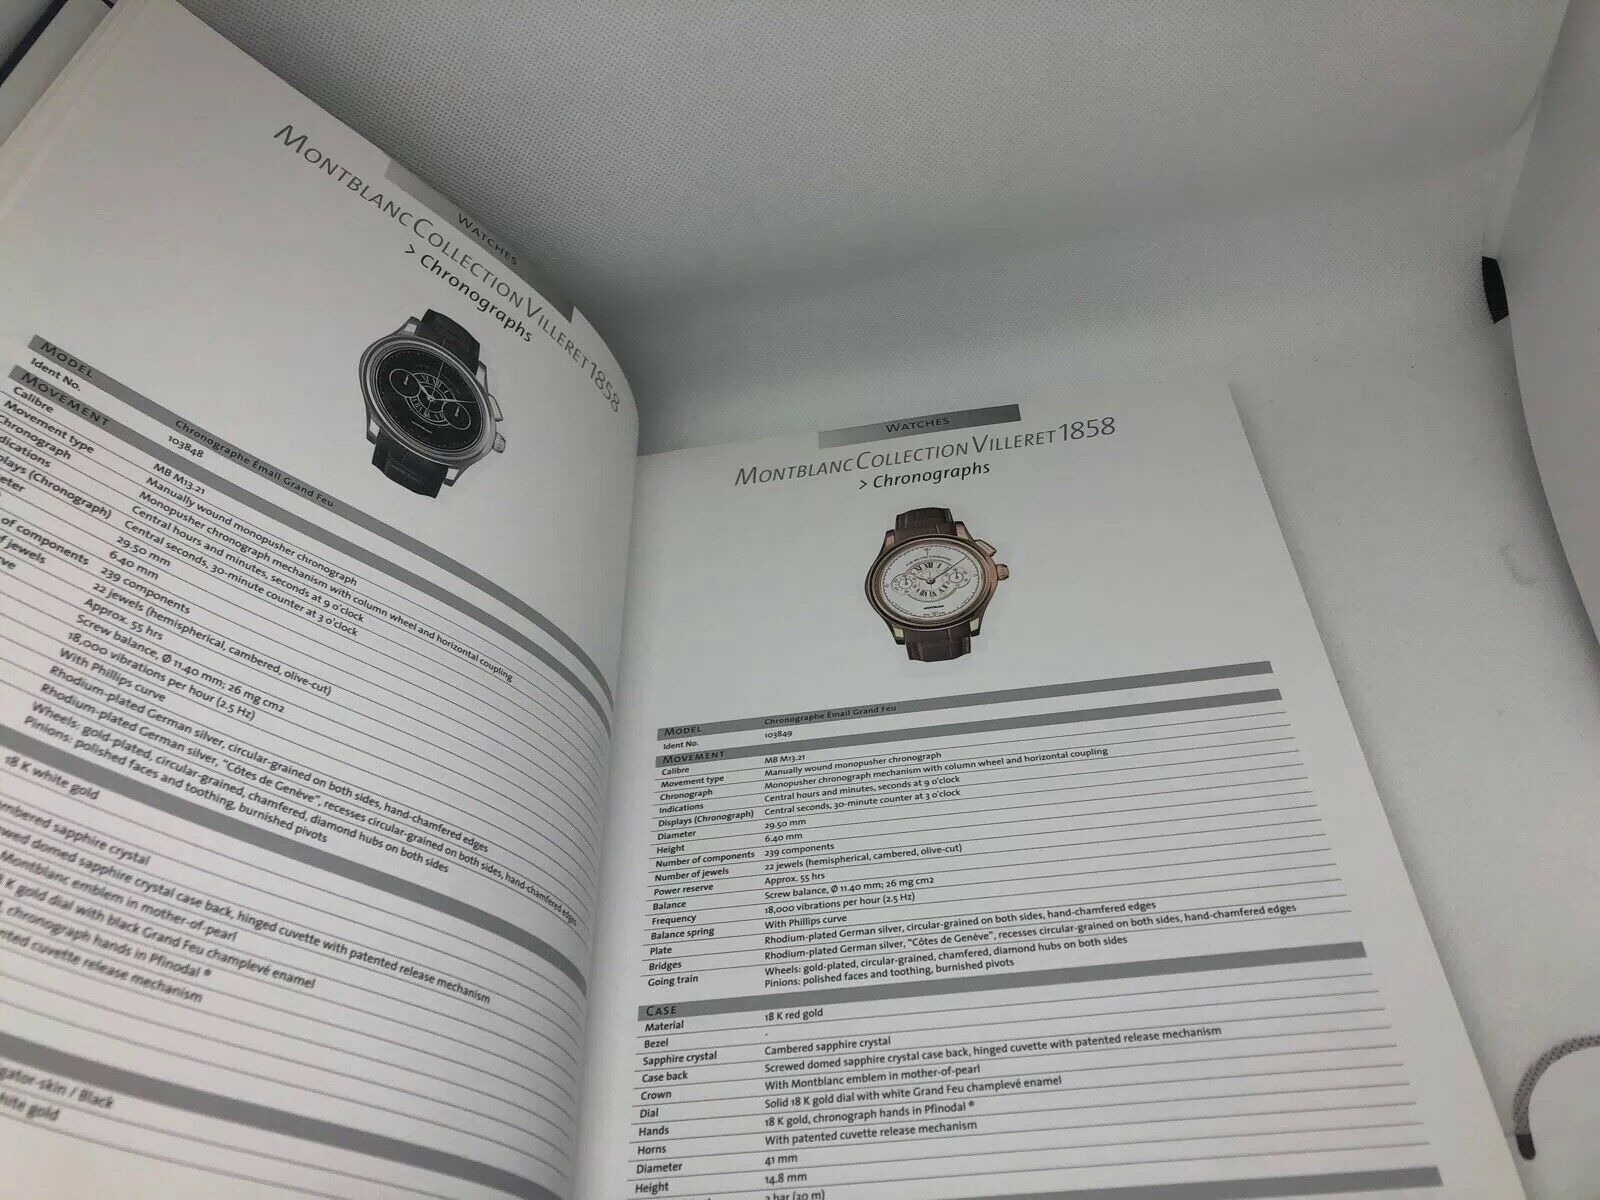 Montblanc Watch Manual Guide Dealer Hardcover Book 2012 2013